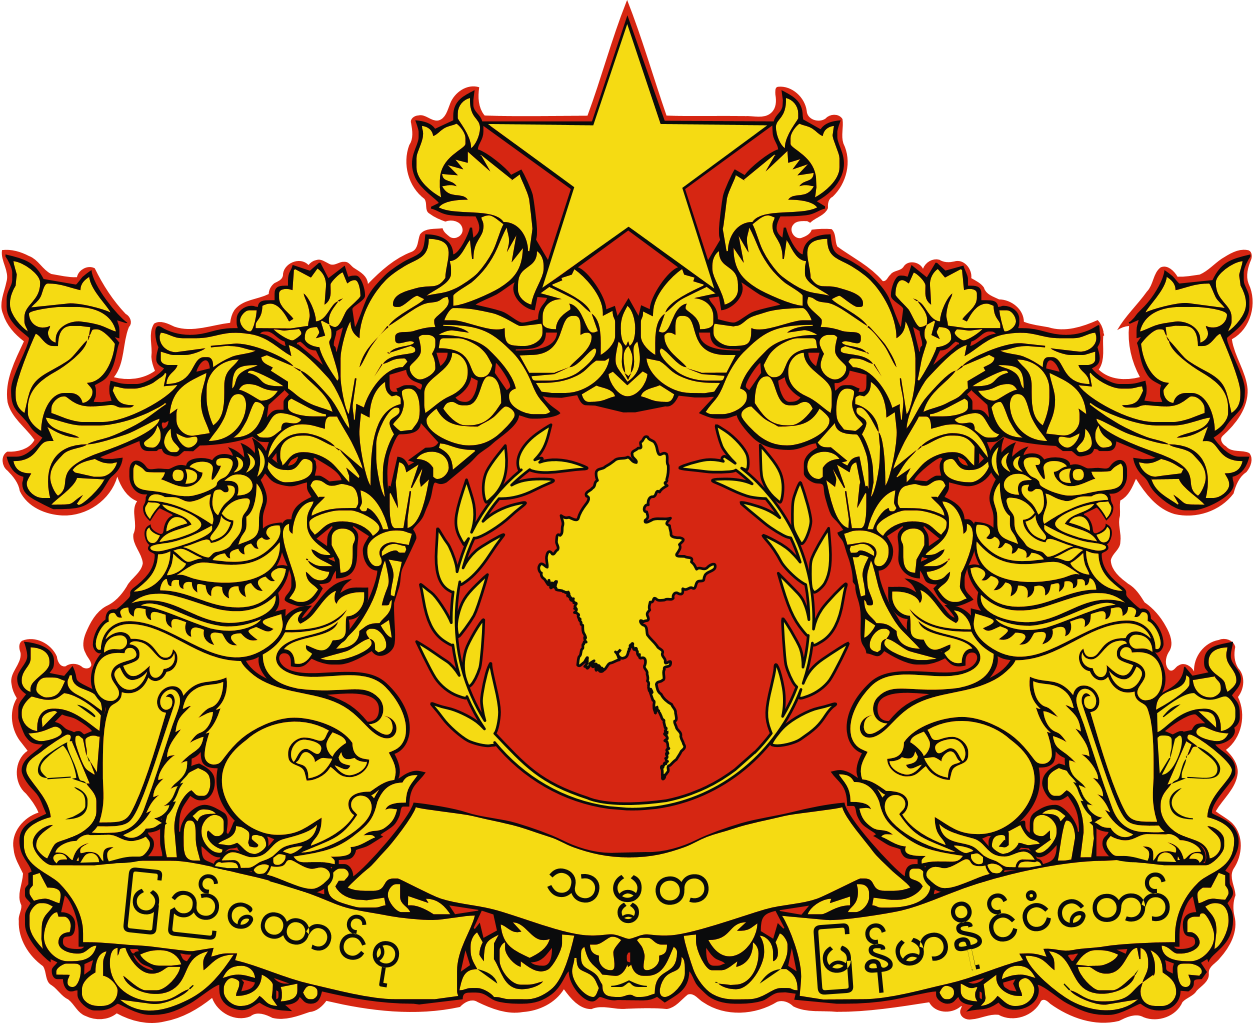 Coat of arms of Republic of the Union of Myanmar